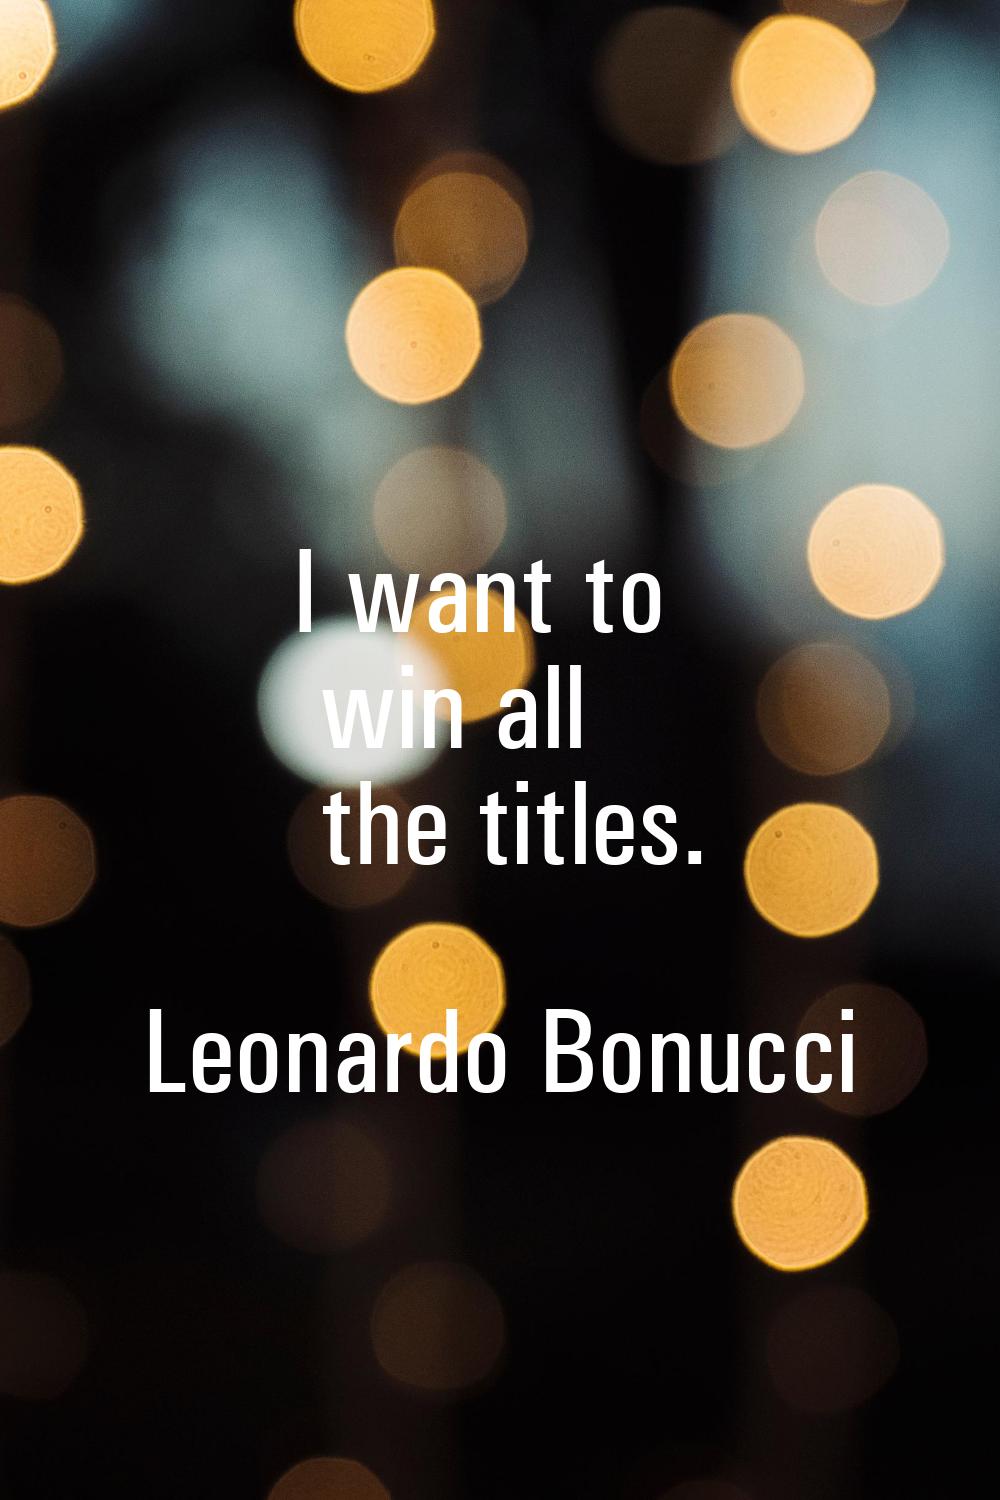 I want to win all the titles.